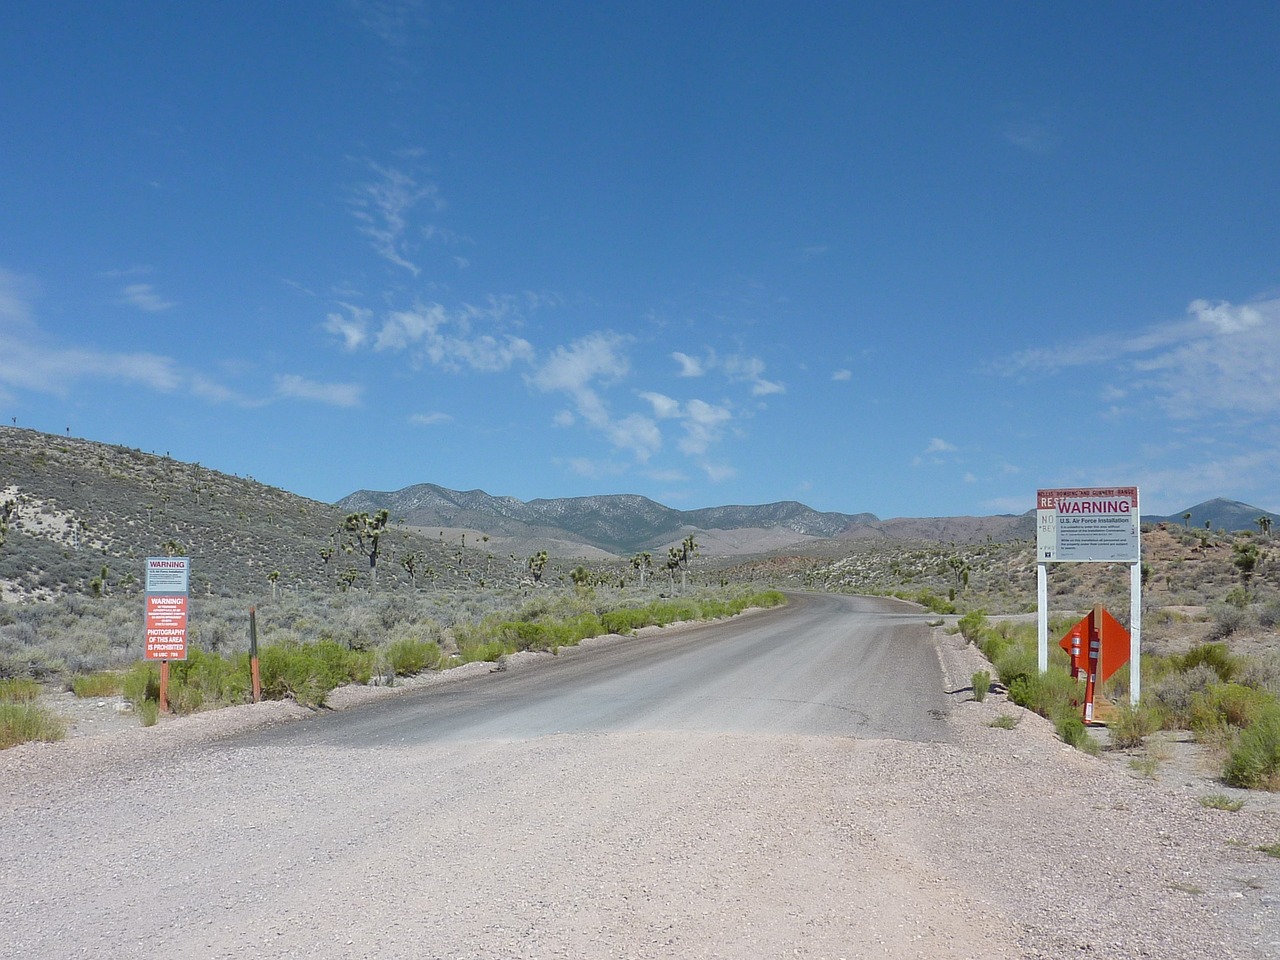 a couple of signs sitting on the side of a road, by Dennis Ashbaugh, les nabis, inside area 51, in the distance is a rocky hill, the gate to hell, year 2 5 0 0